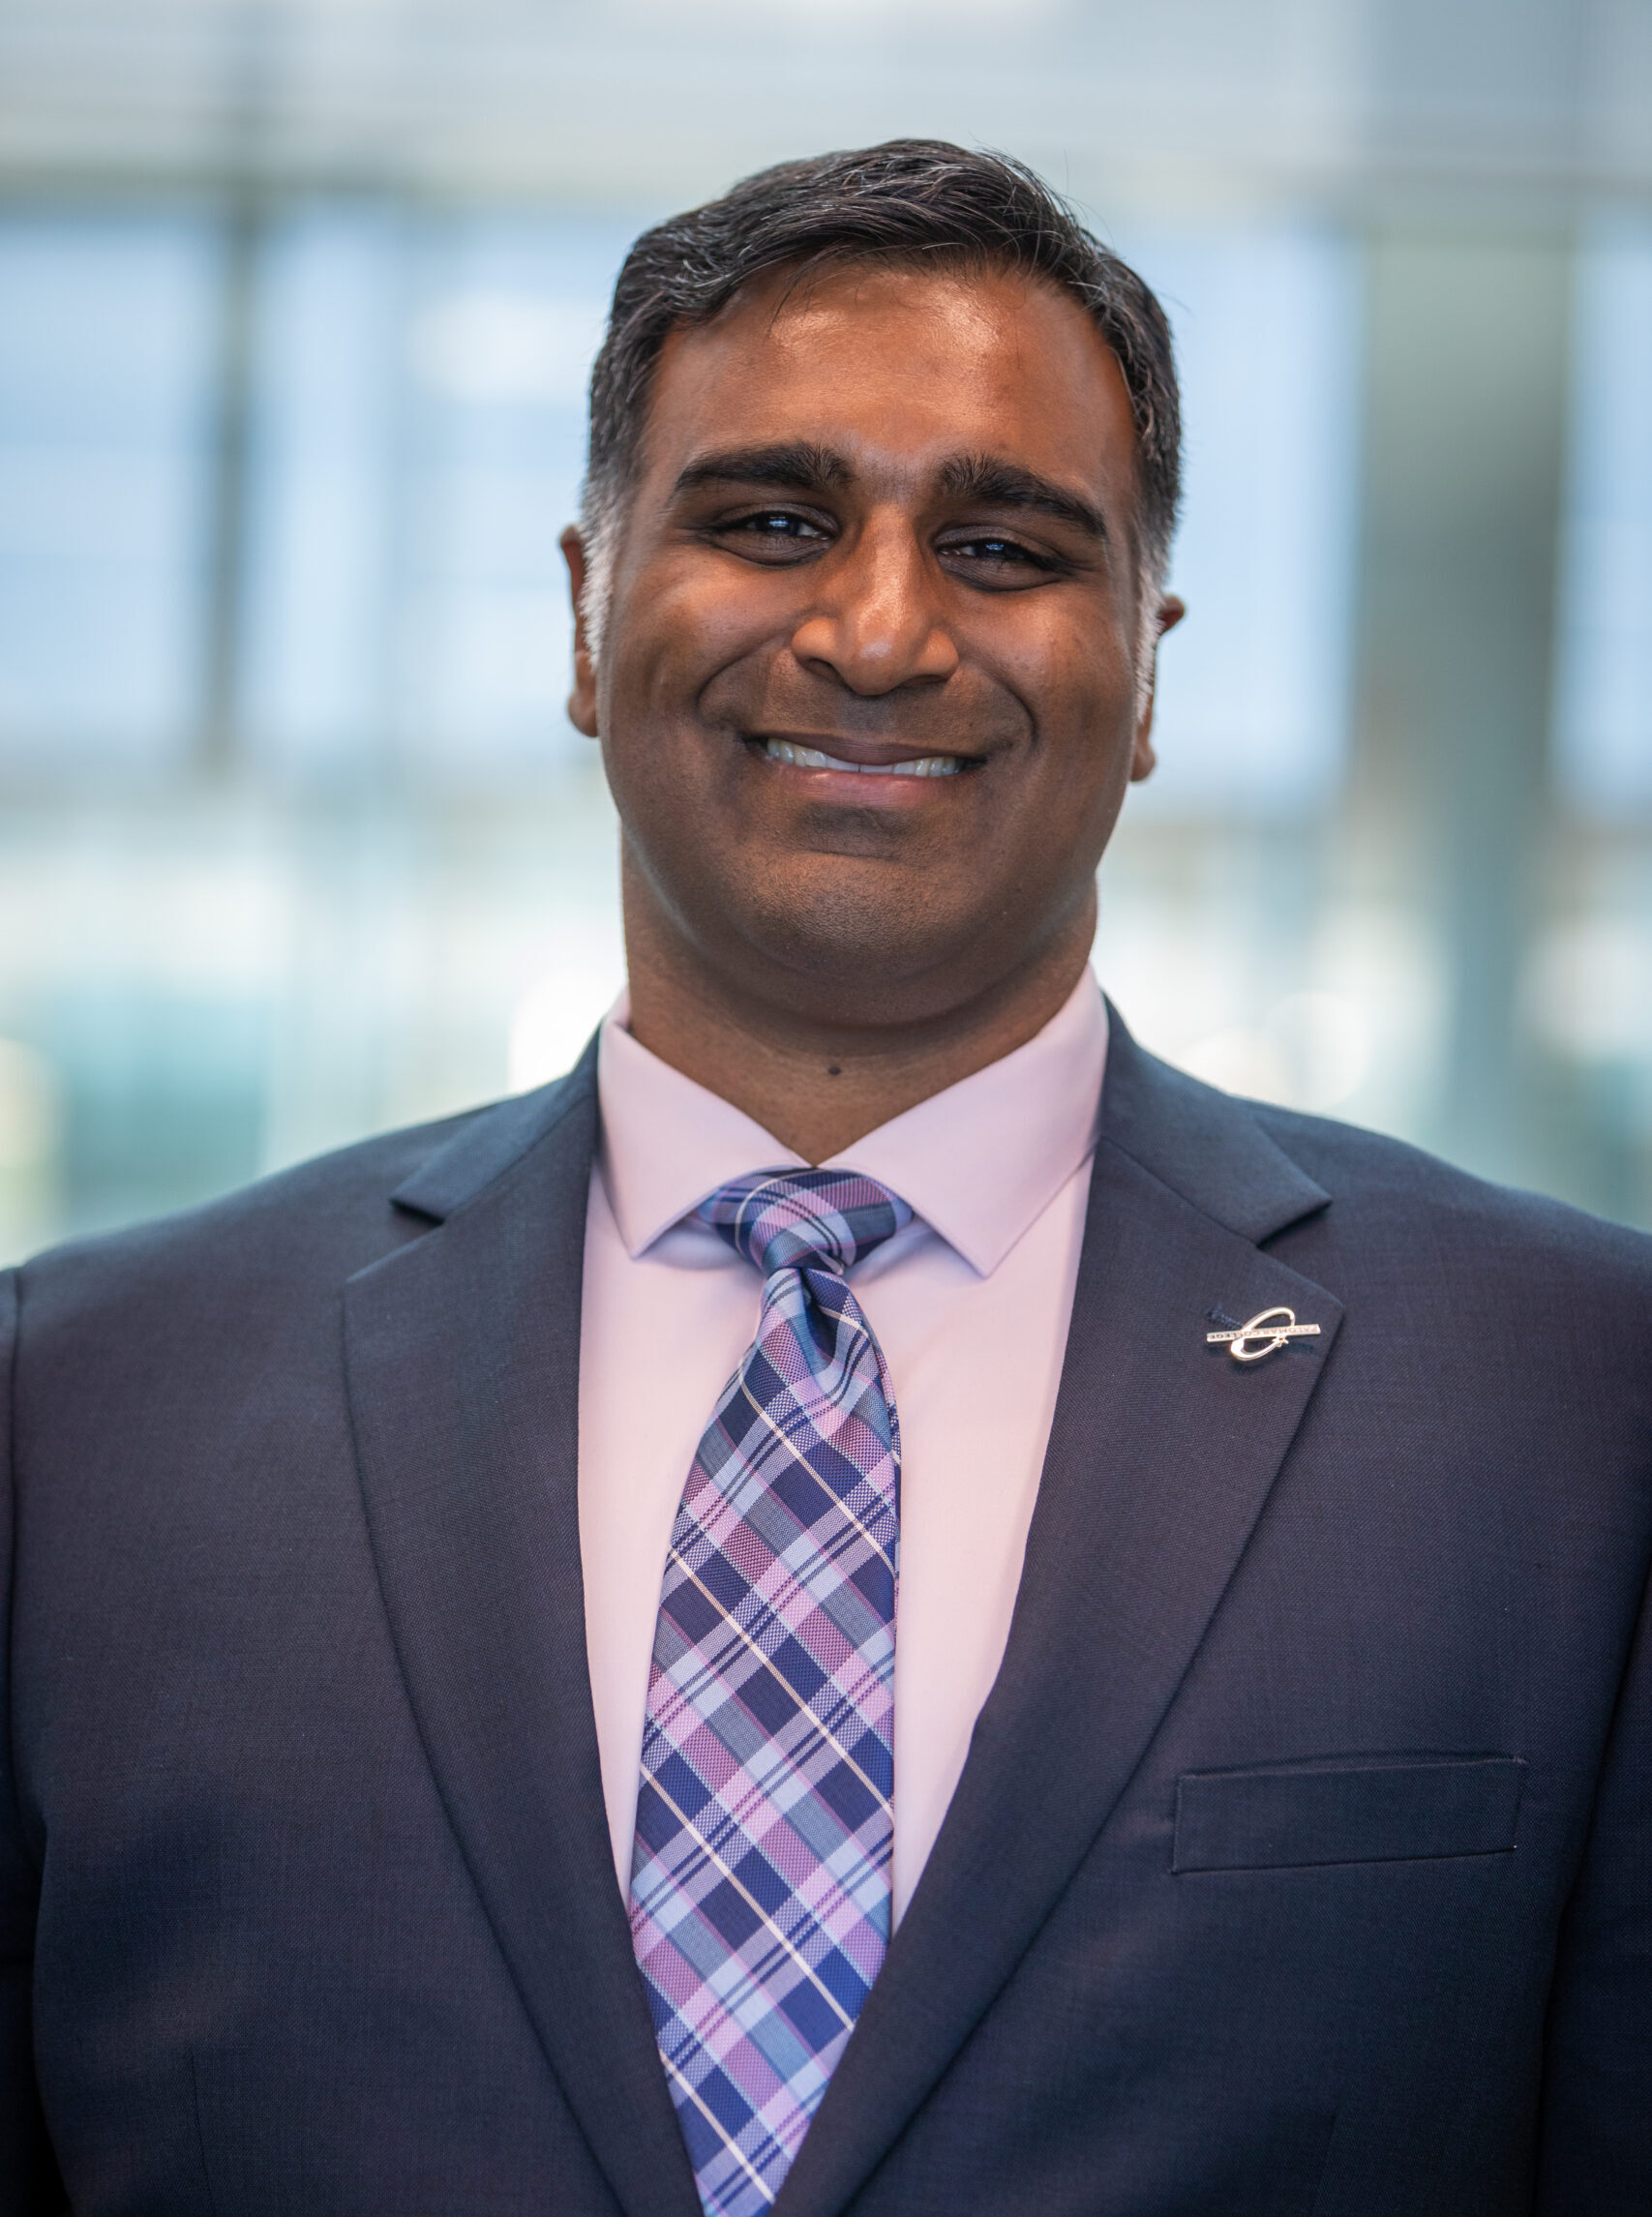 Portrait of a man of Indian descent smiling, wearing a dark grey suit and a checkered tie.